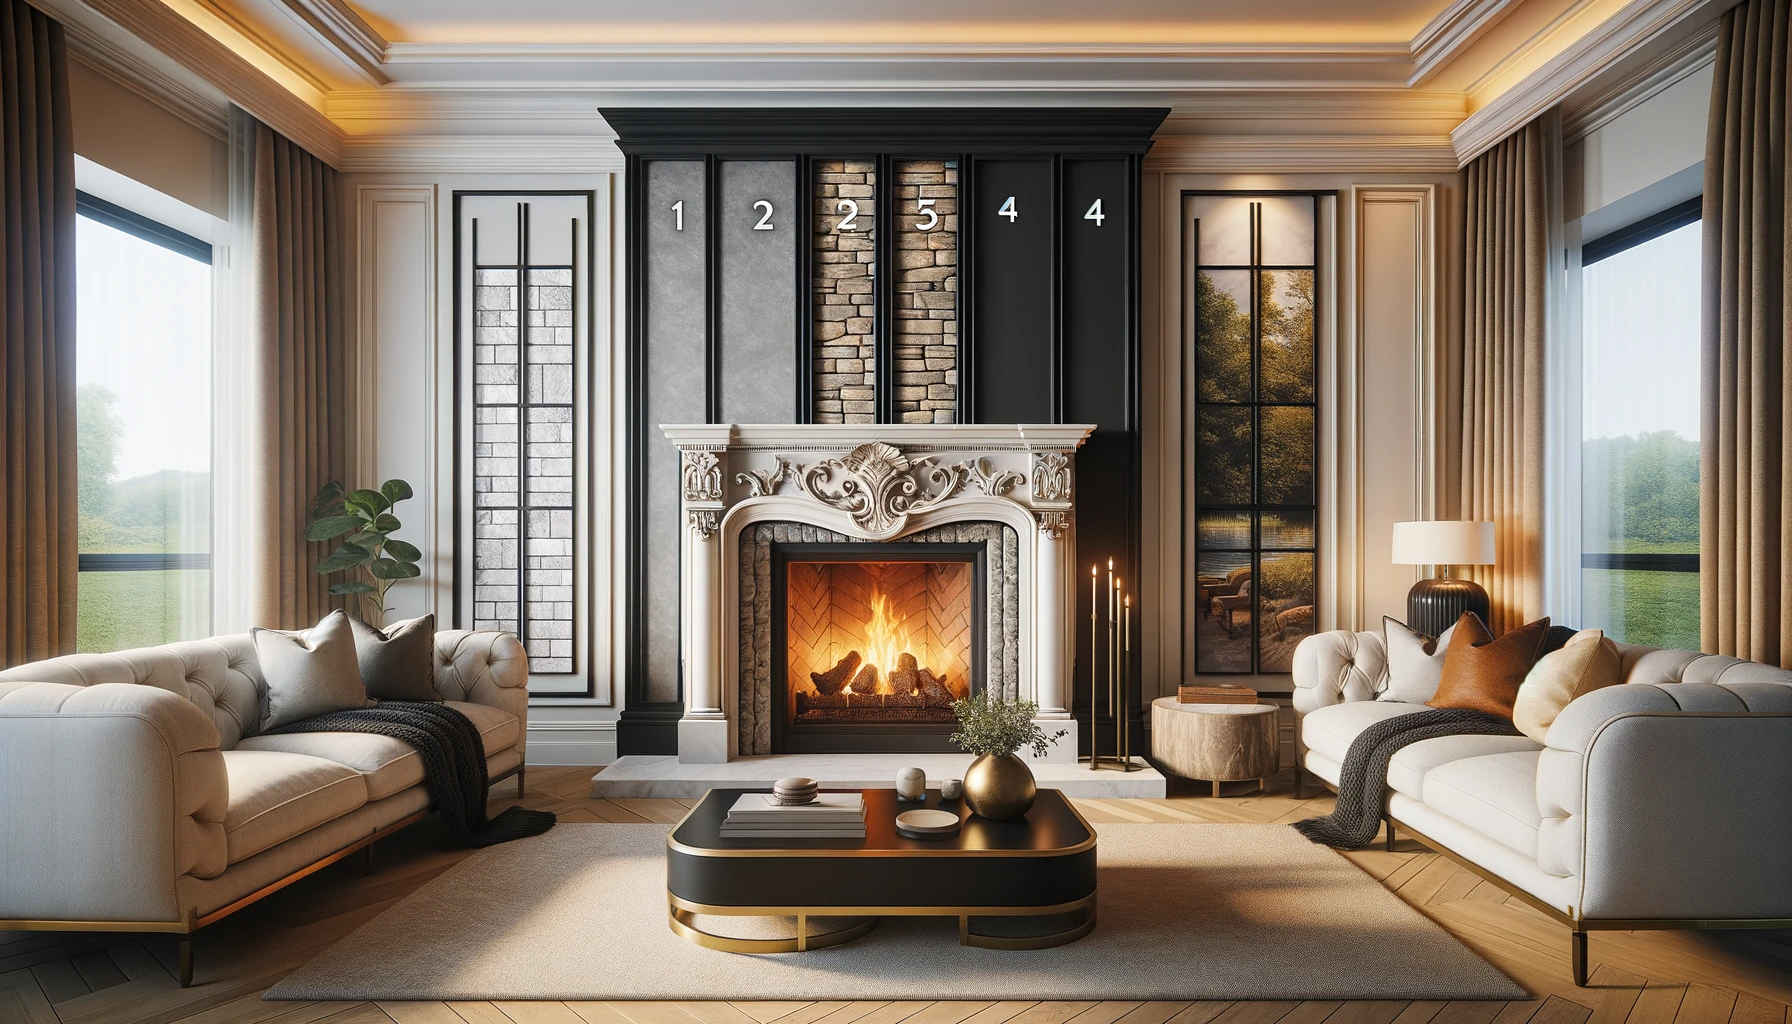 Frame Your Fireplace Insert in Style (Trim Options)